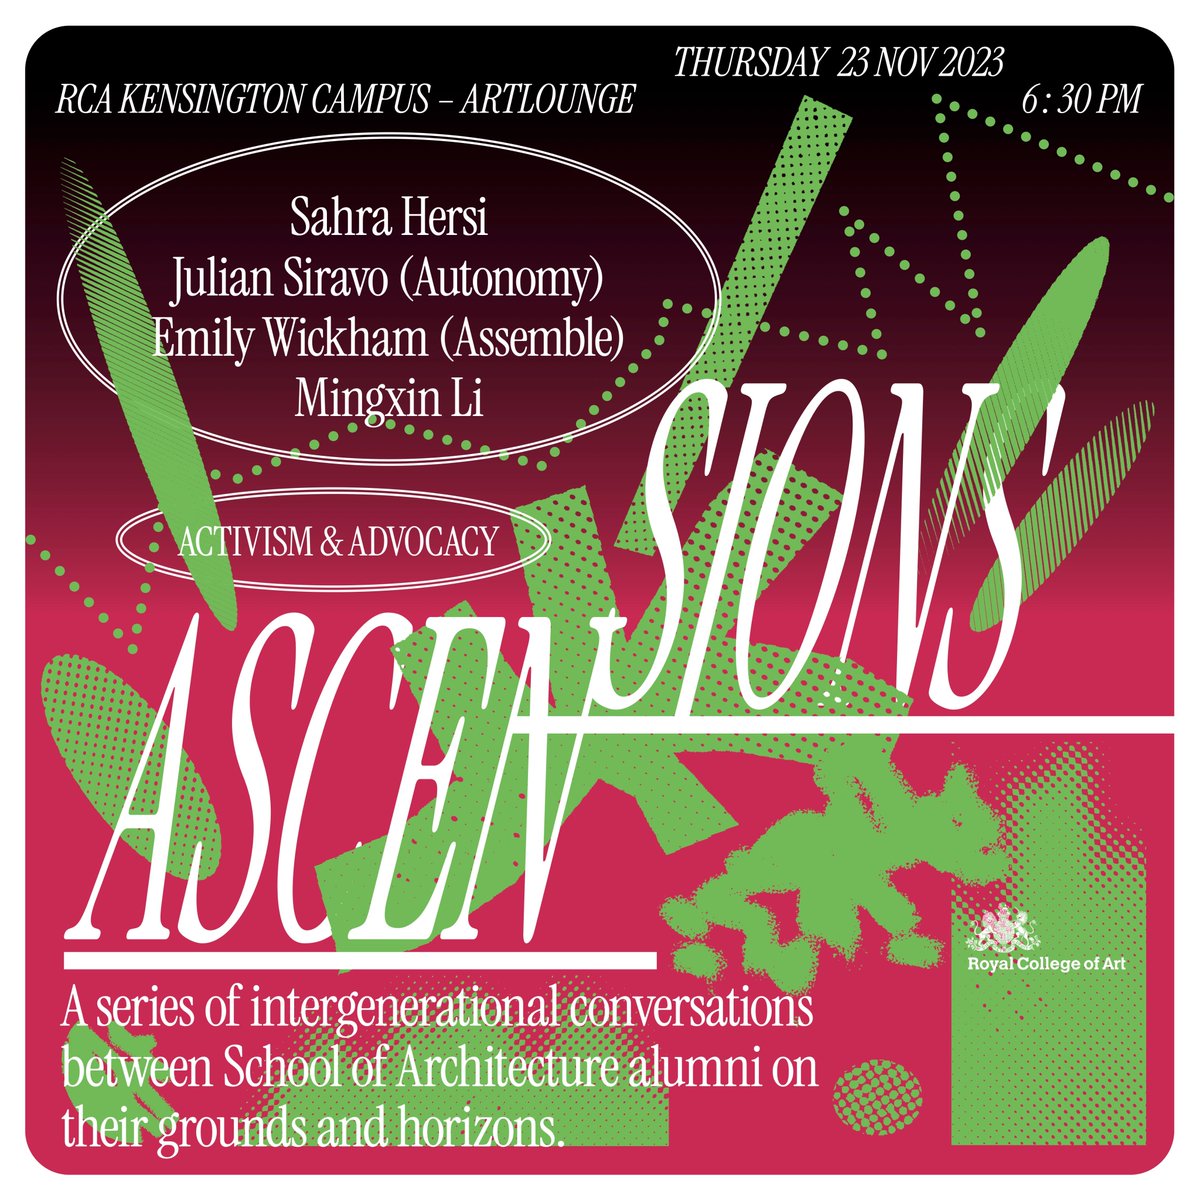 Ascensions 3 {ACTIVISM & ADVOCACY} Join @RCA School of Architecture in the ArtBar/Lounge, Kensington campus, on 23 November for Ascensions 3, the third event in the series of intergenerational conversations between School of Architecture alumni. RSVP: tinyurl.com/Ascensions3